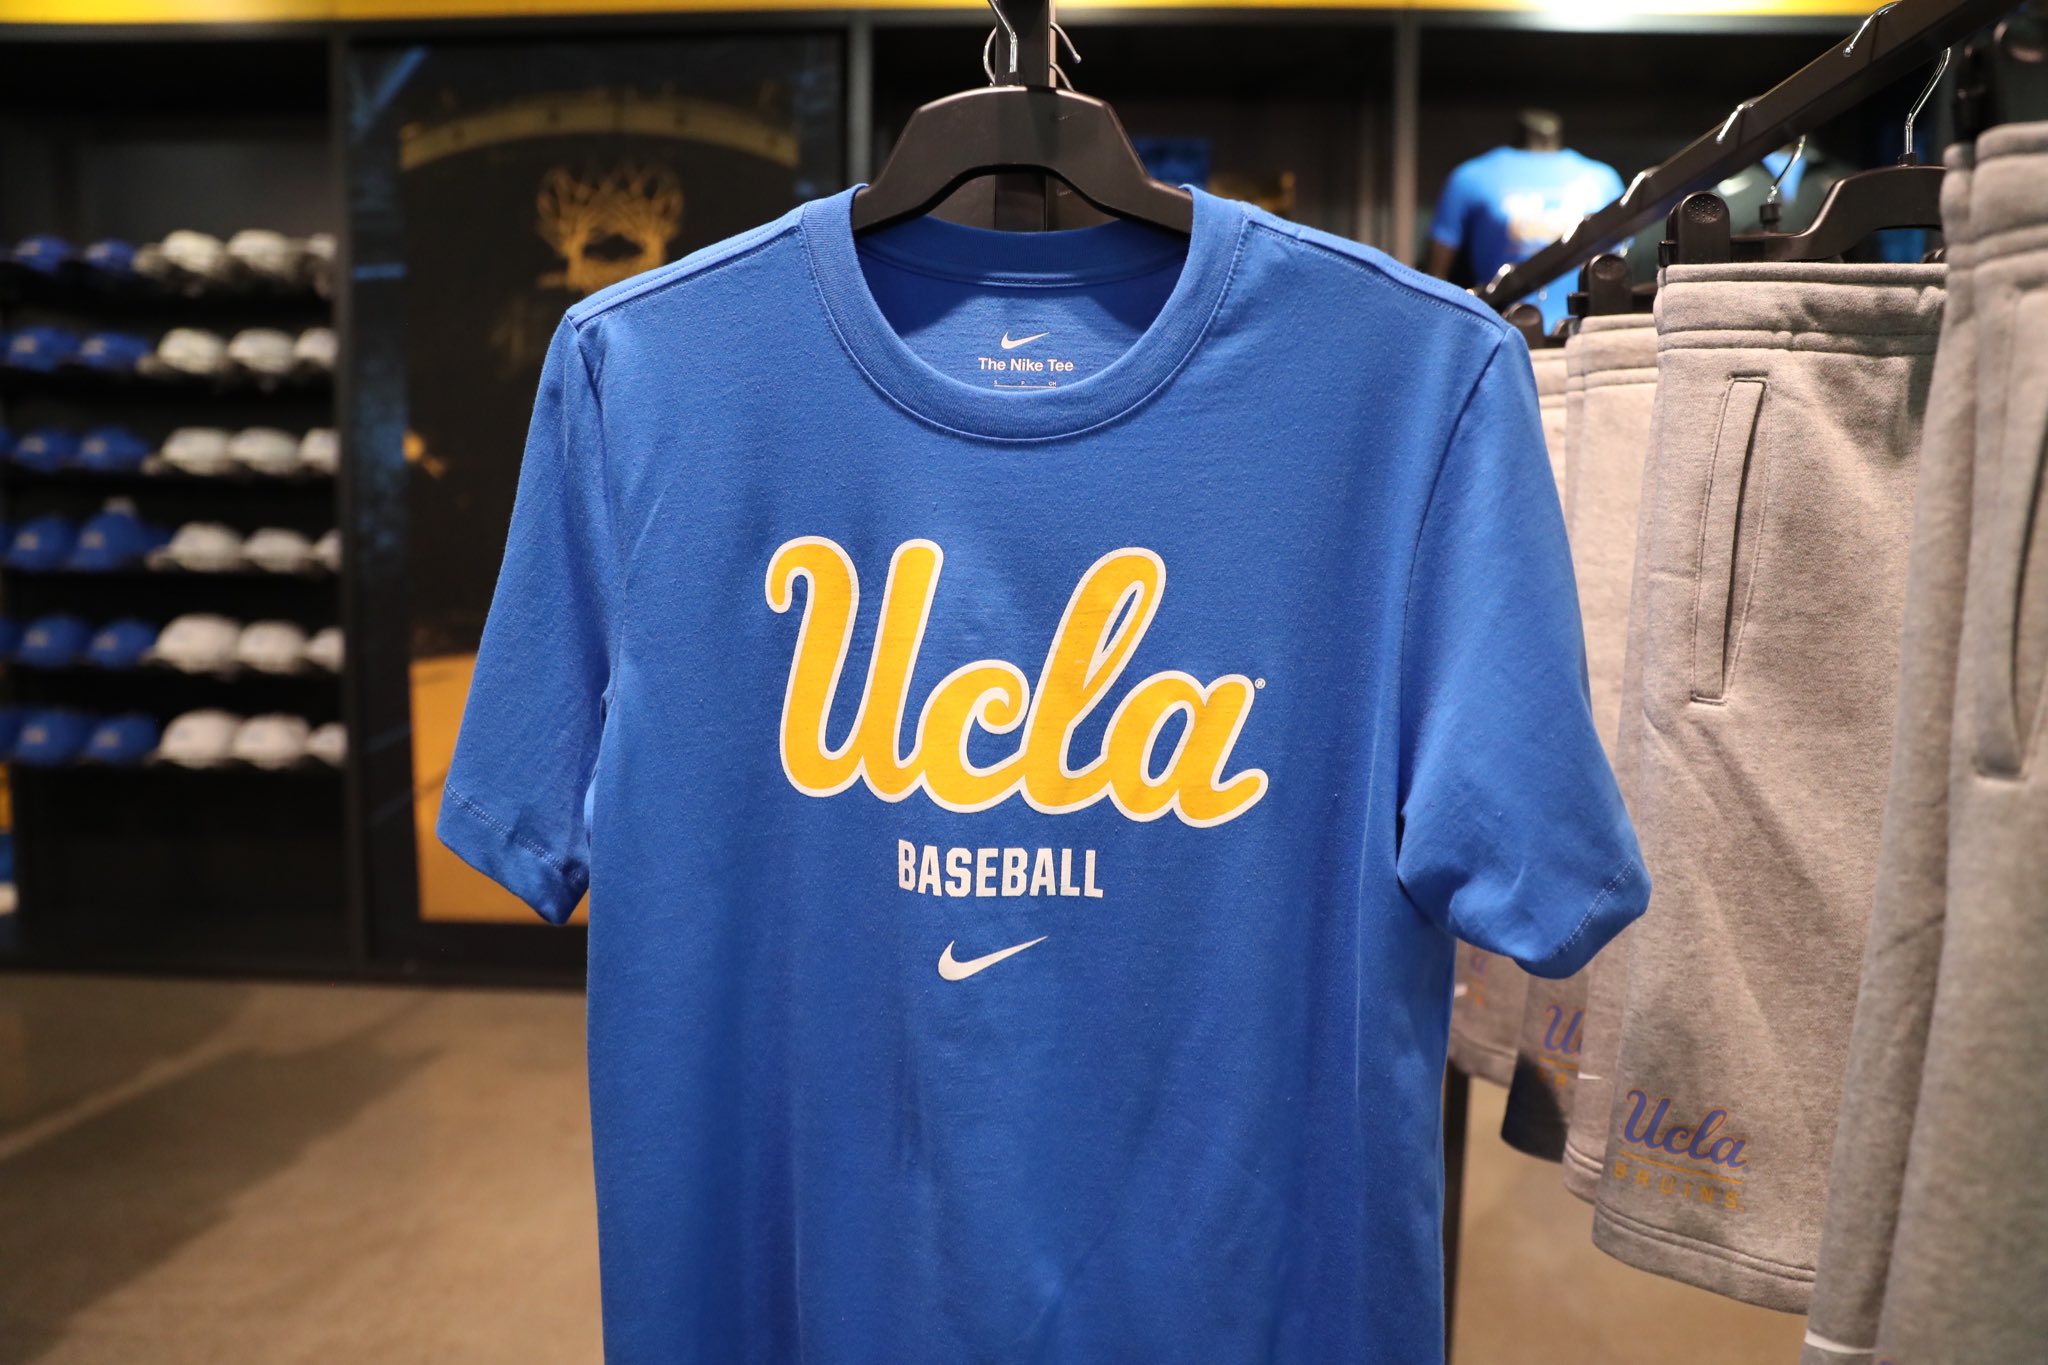 Twitter a new Nike gear is now available on campus at the UCLA Store. #GoBruins https://t.co/oLefIyy4wO" / Twitter